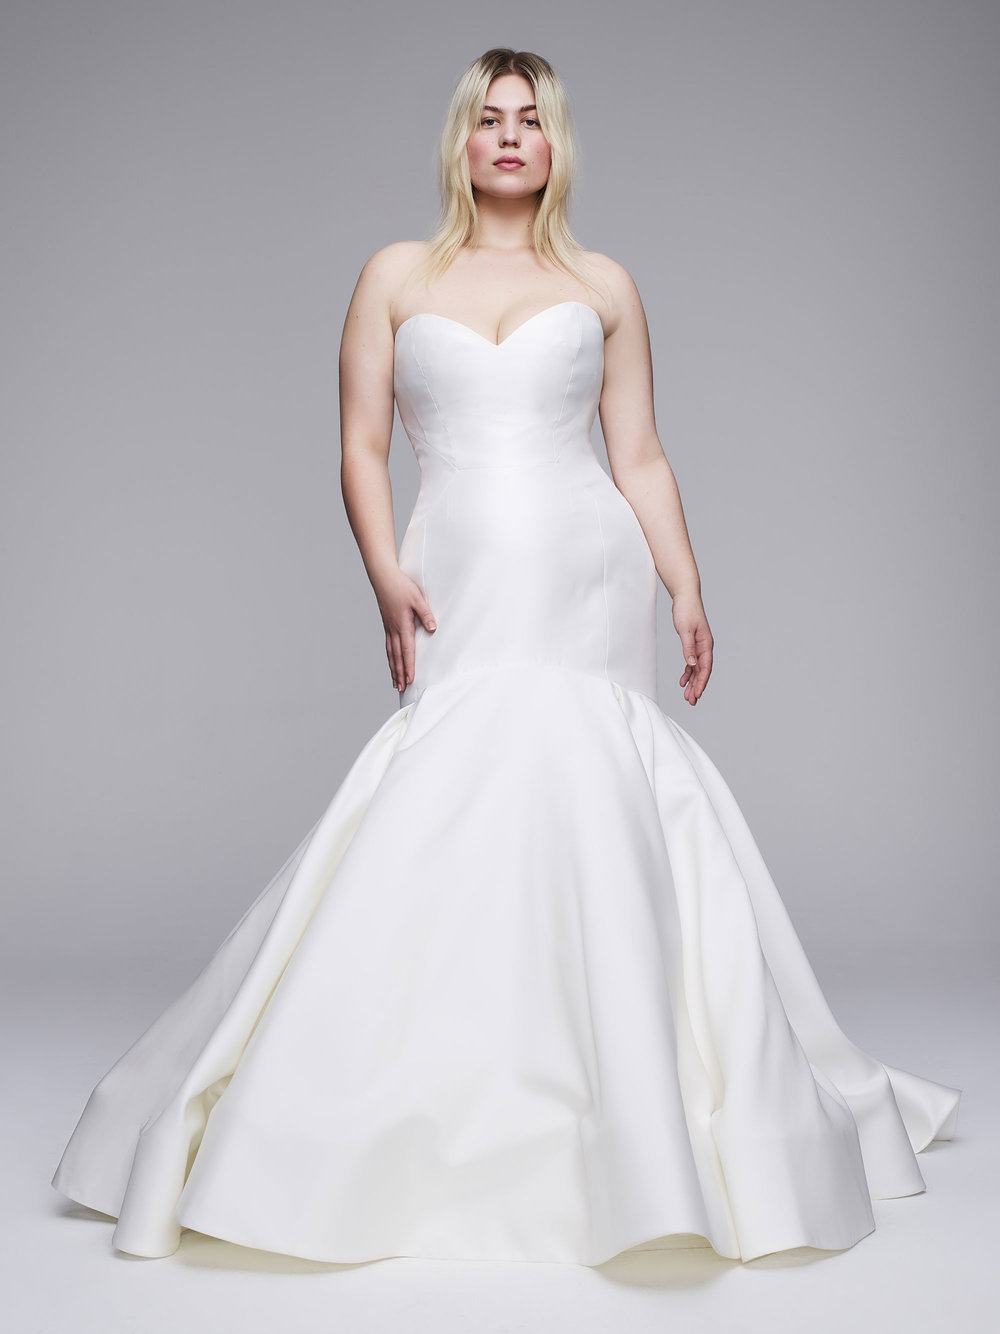 Plus Size Designer Wedding Gowns from Curve Couture by Anne Barge